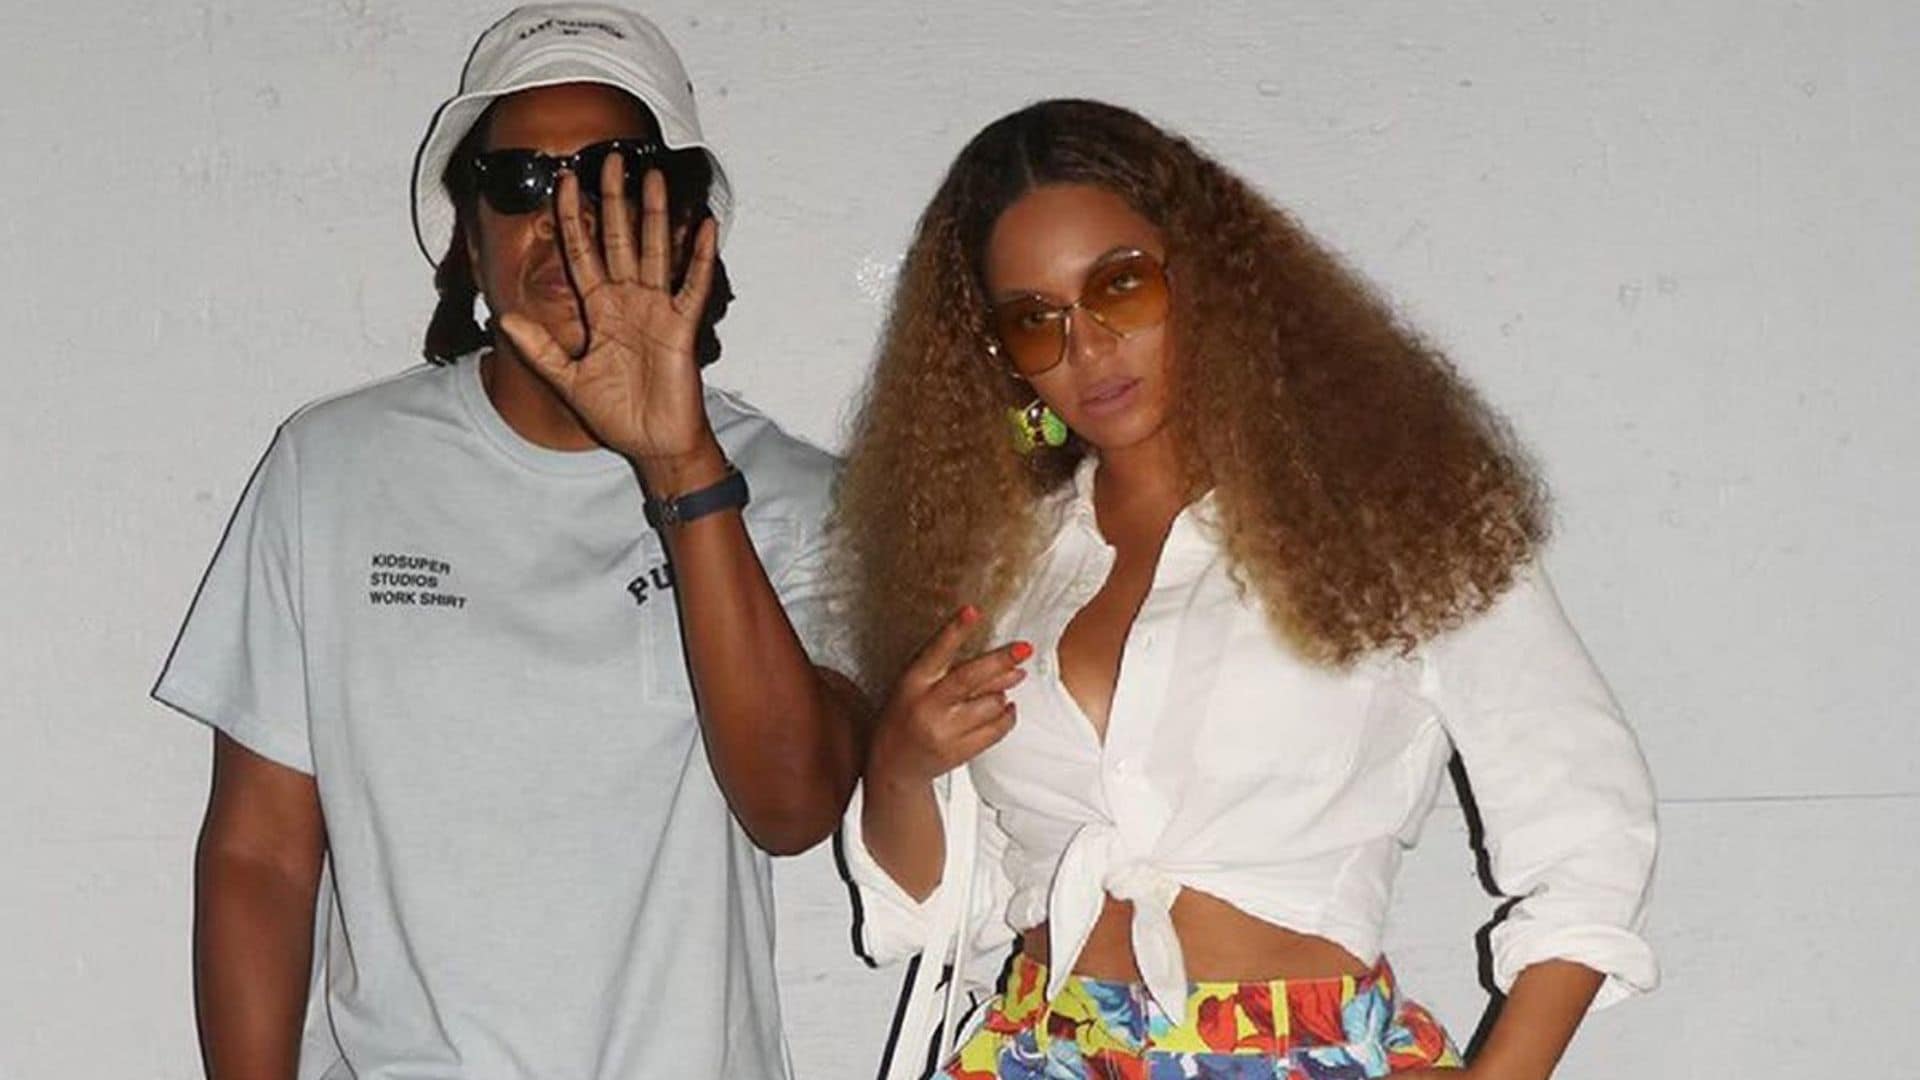 Beyoncé and Jay-Z travel to lunch in NYC via helicopter: Check out the date!